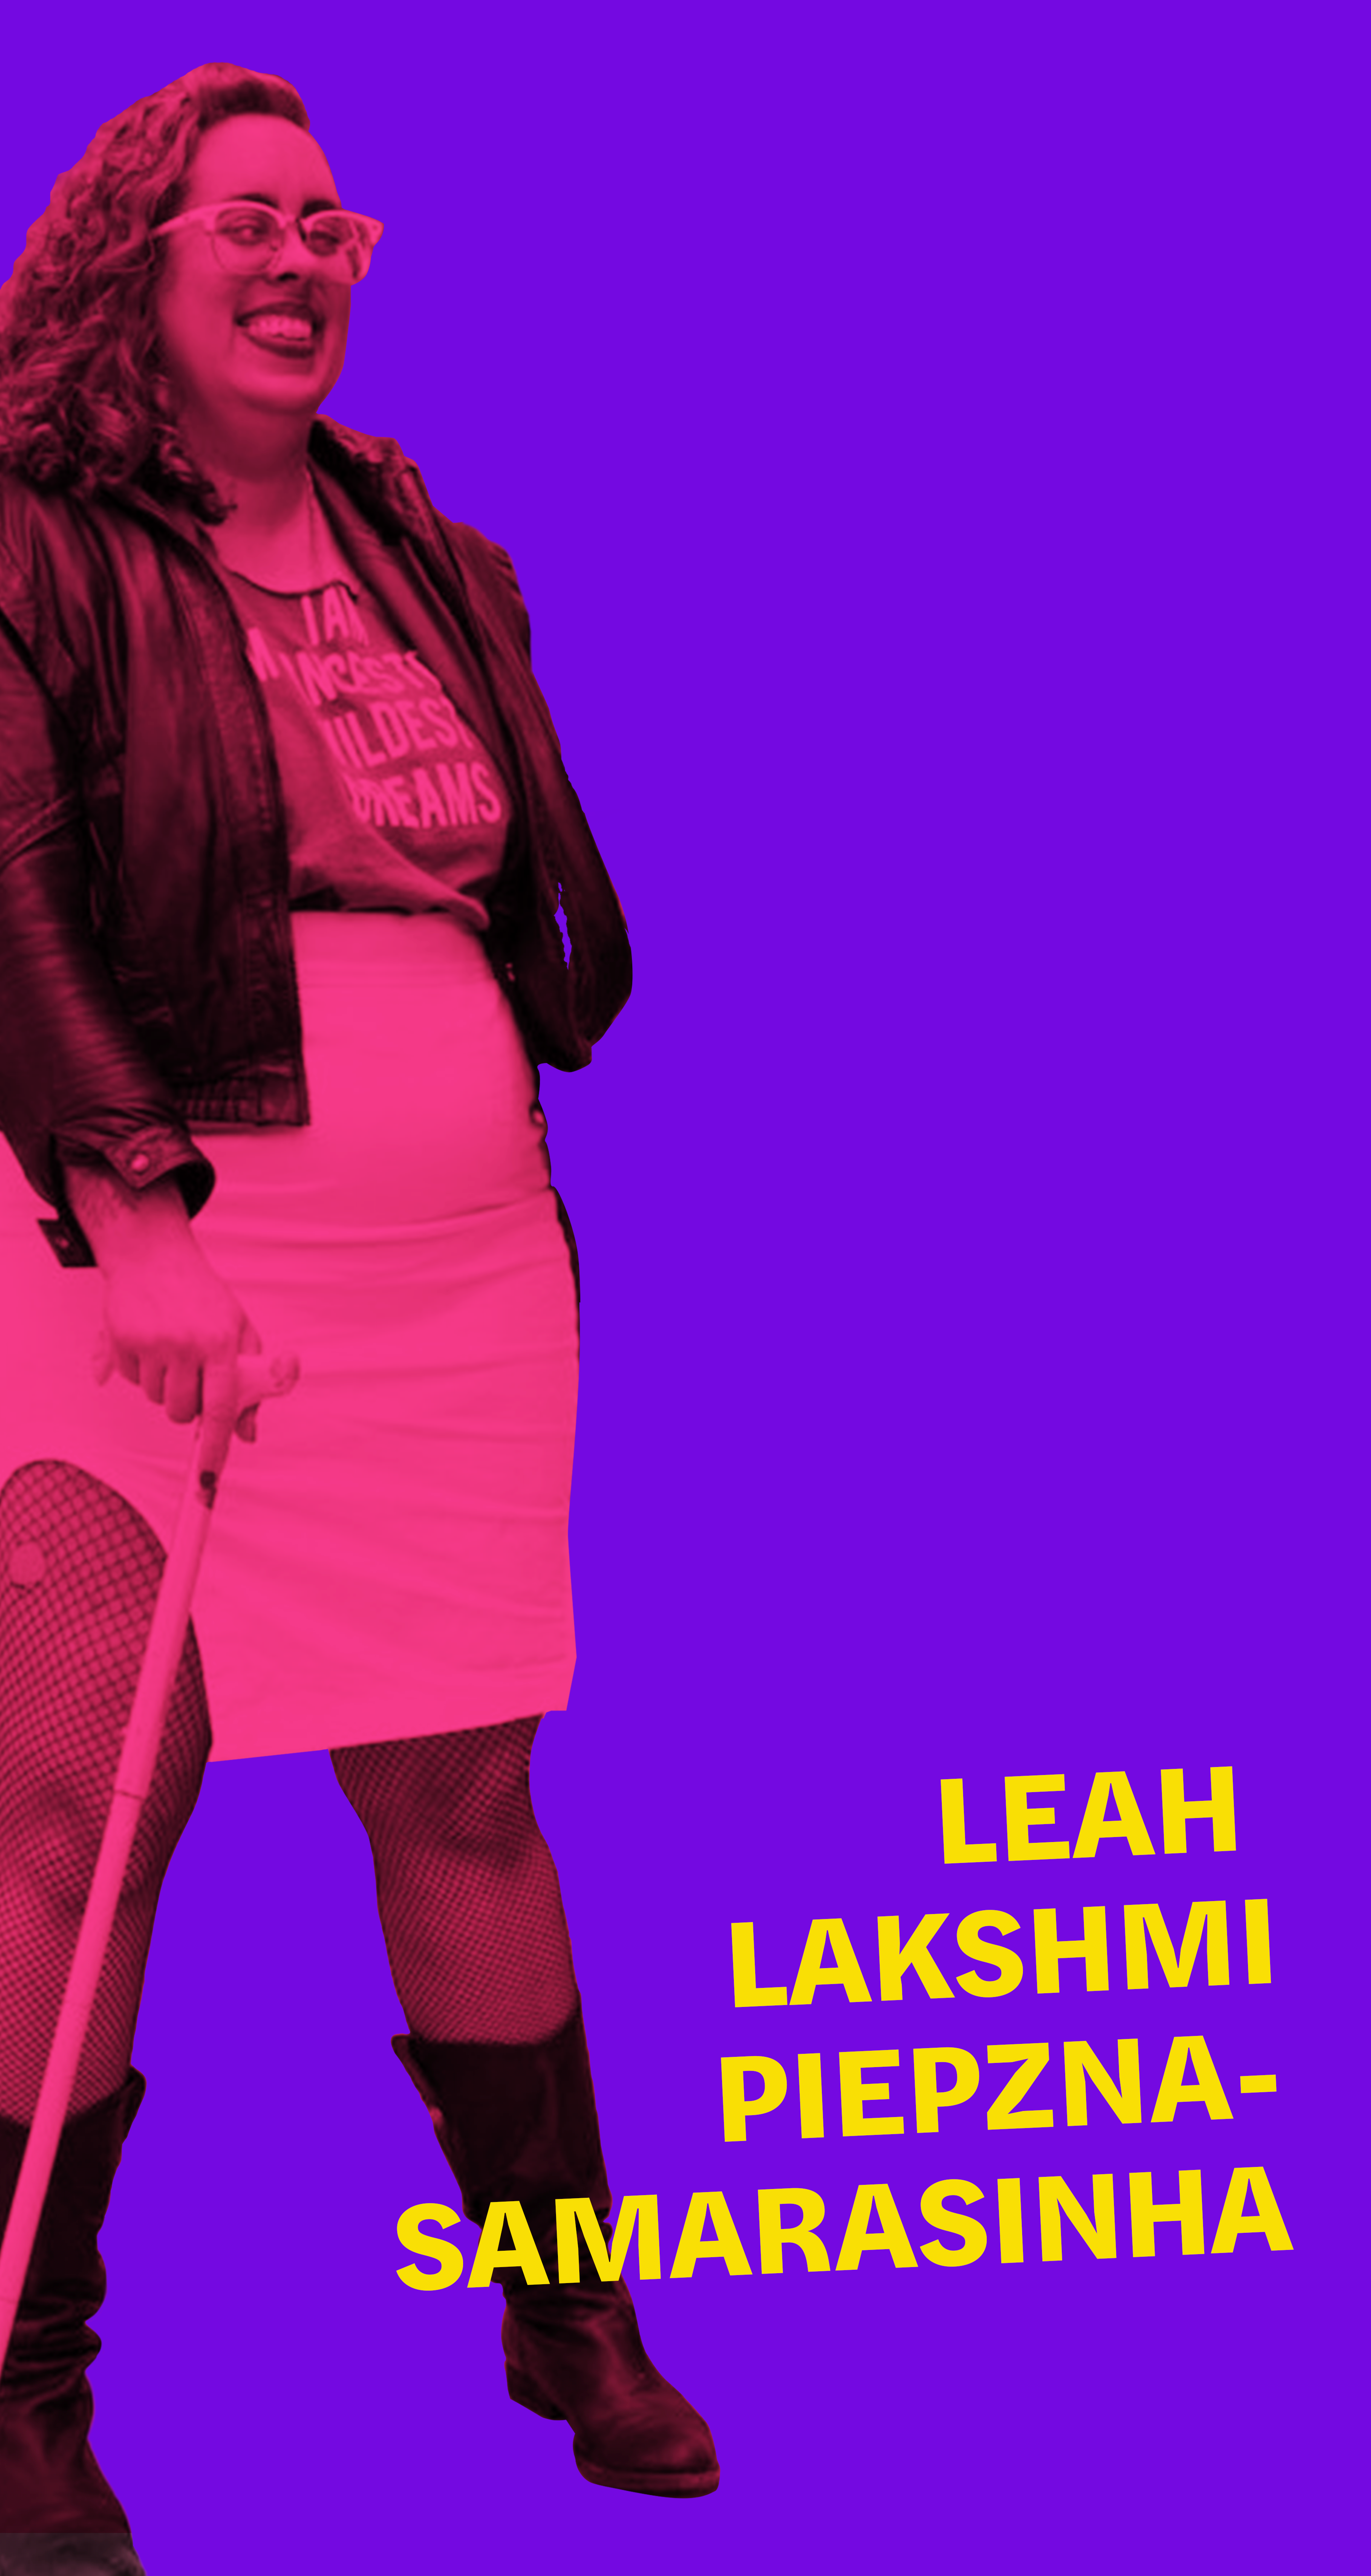 A picture of Leah Lakshmi wearing a black leather jacket, dress, boots, glasses smiling holding a cane.